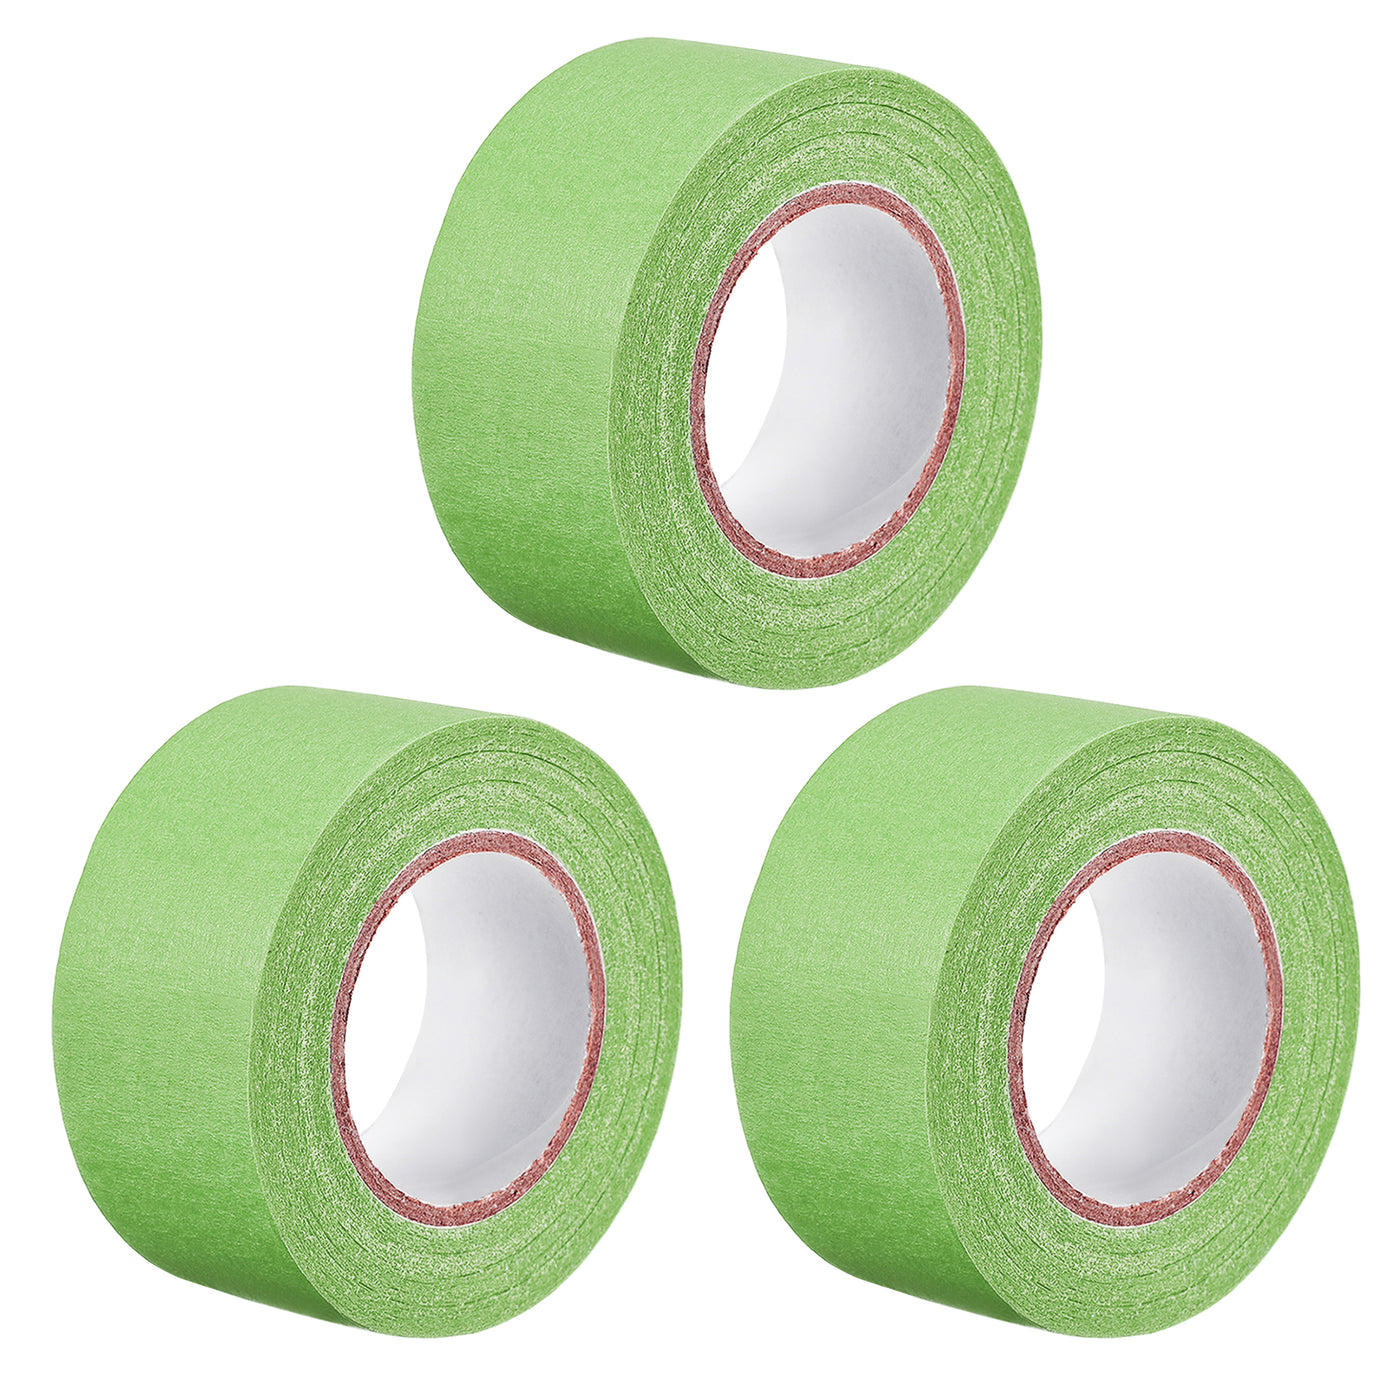 uxcell Uxcell 3Pcs 30mm 1.2 inch Wide 20m 21 Yards Masking Tape Painter Tape Rolls Light Green